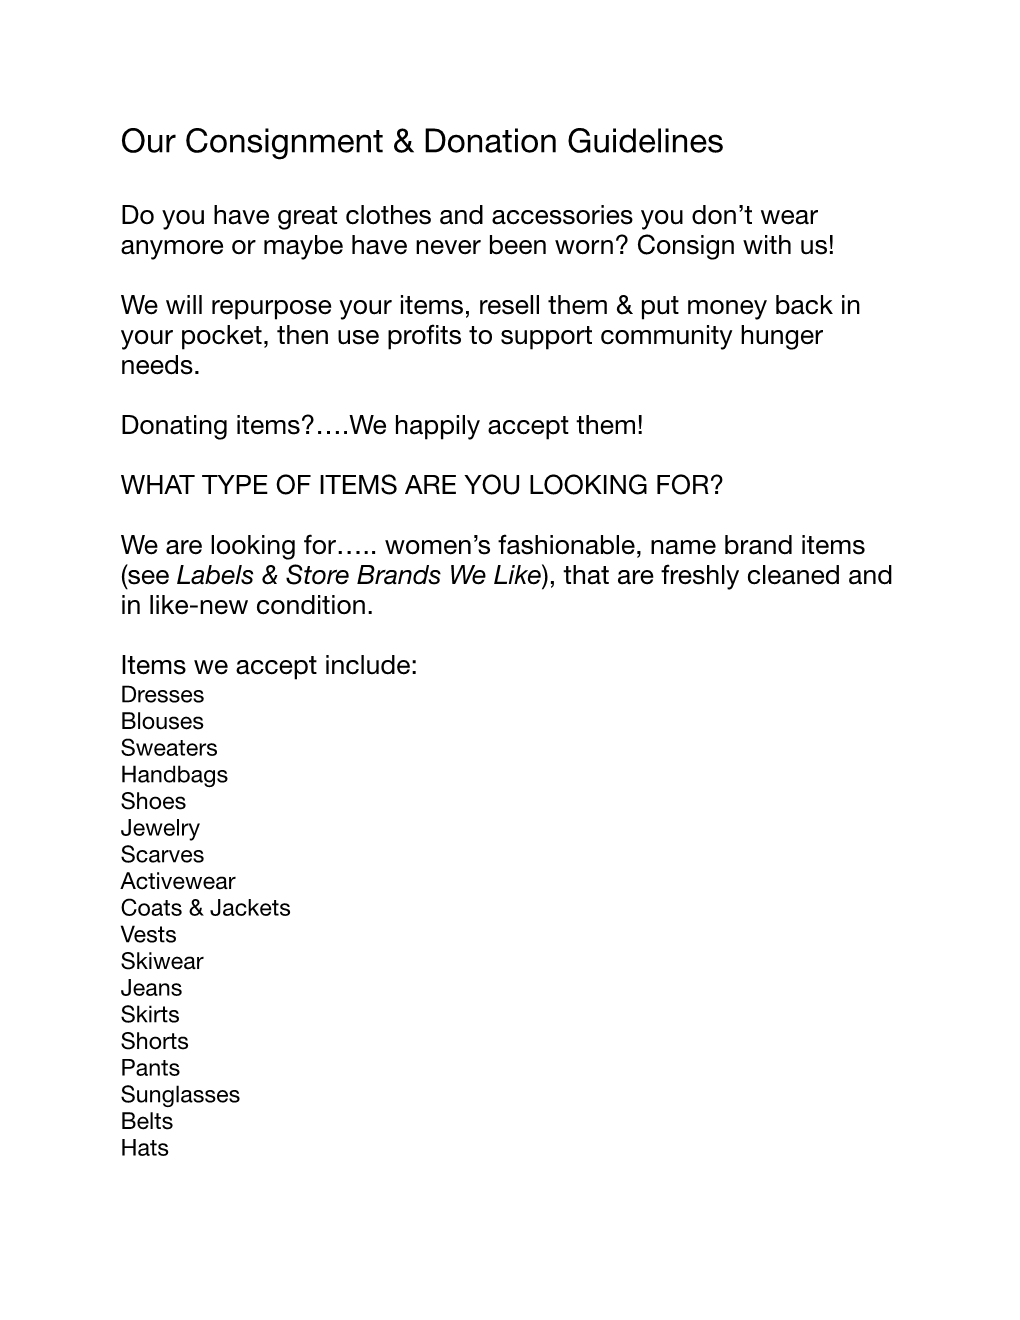 Our Consignment & Donation Guidelines